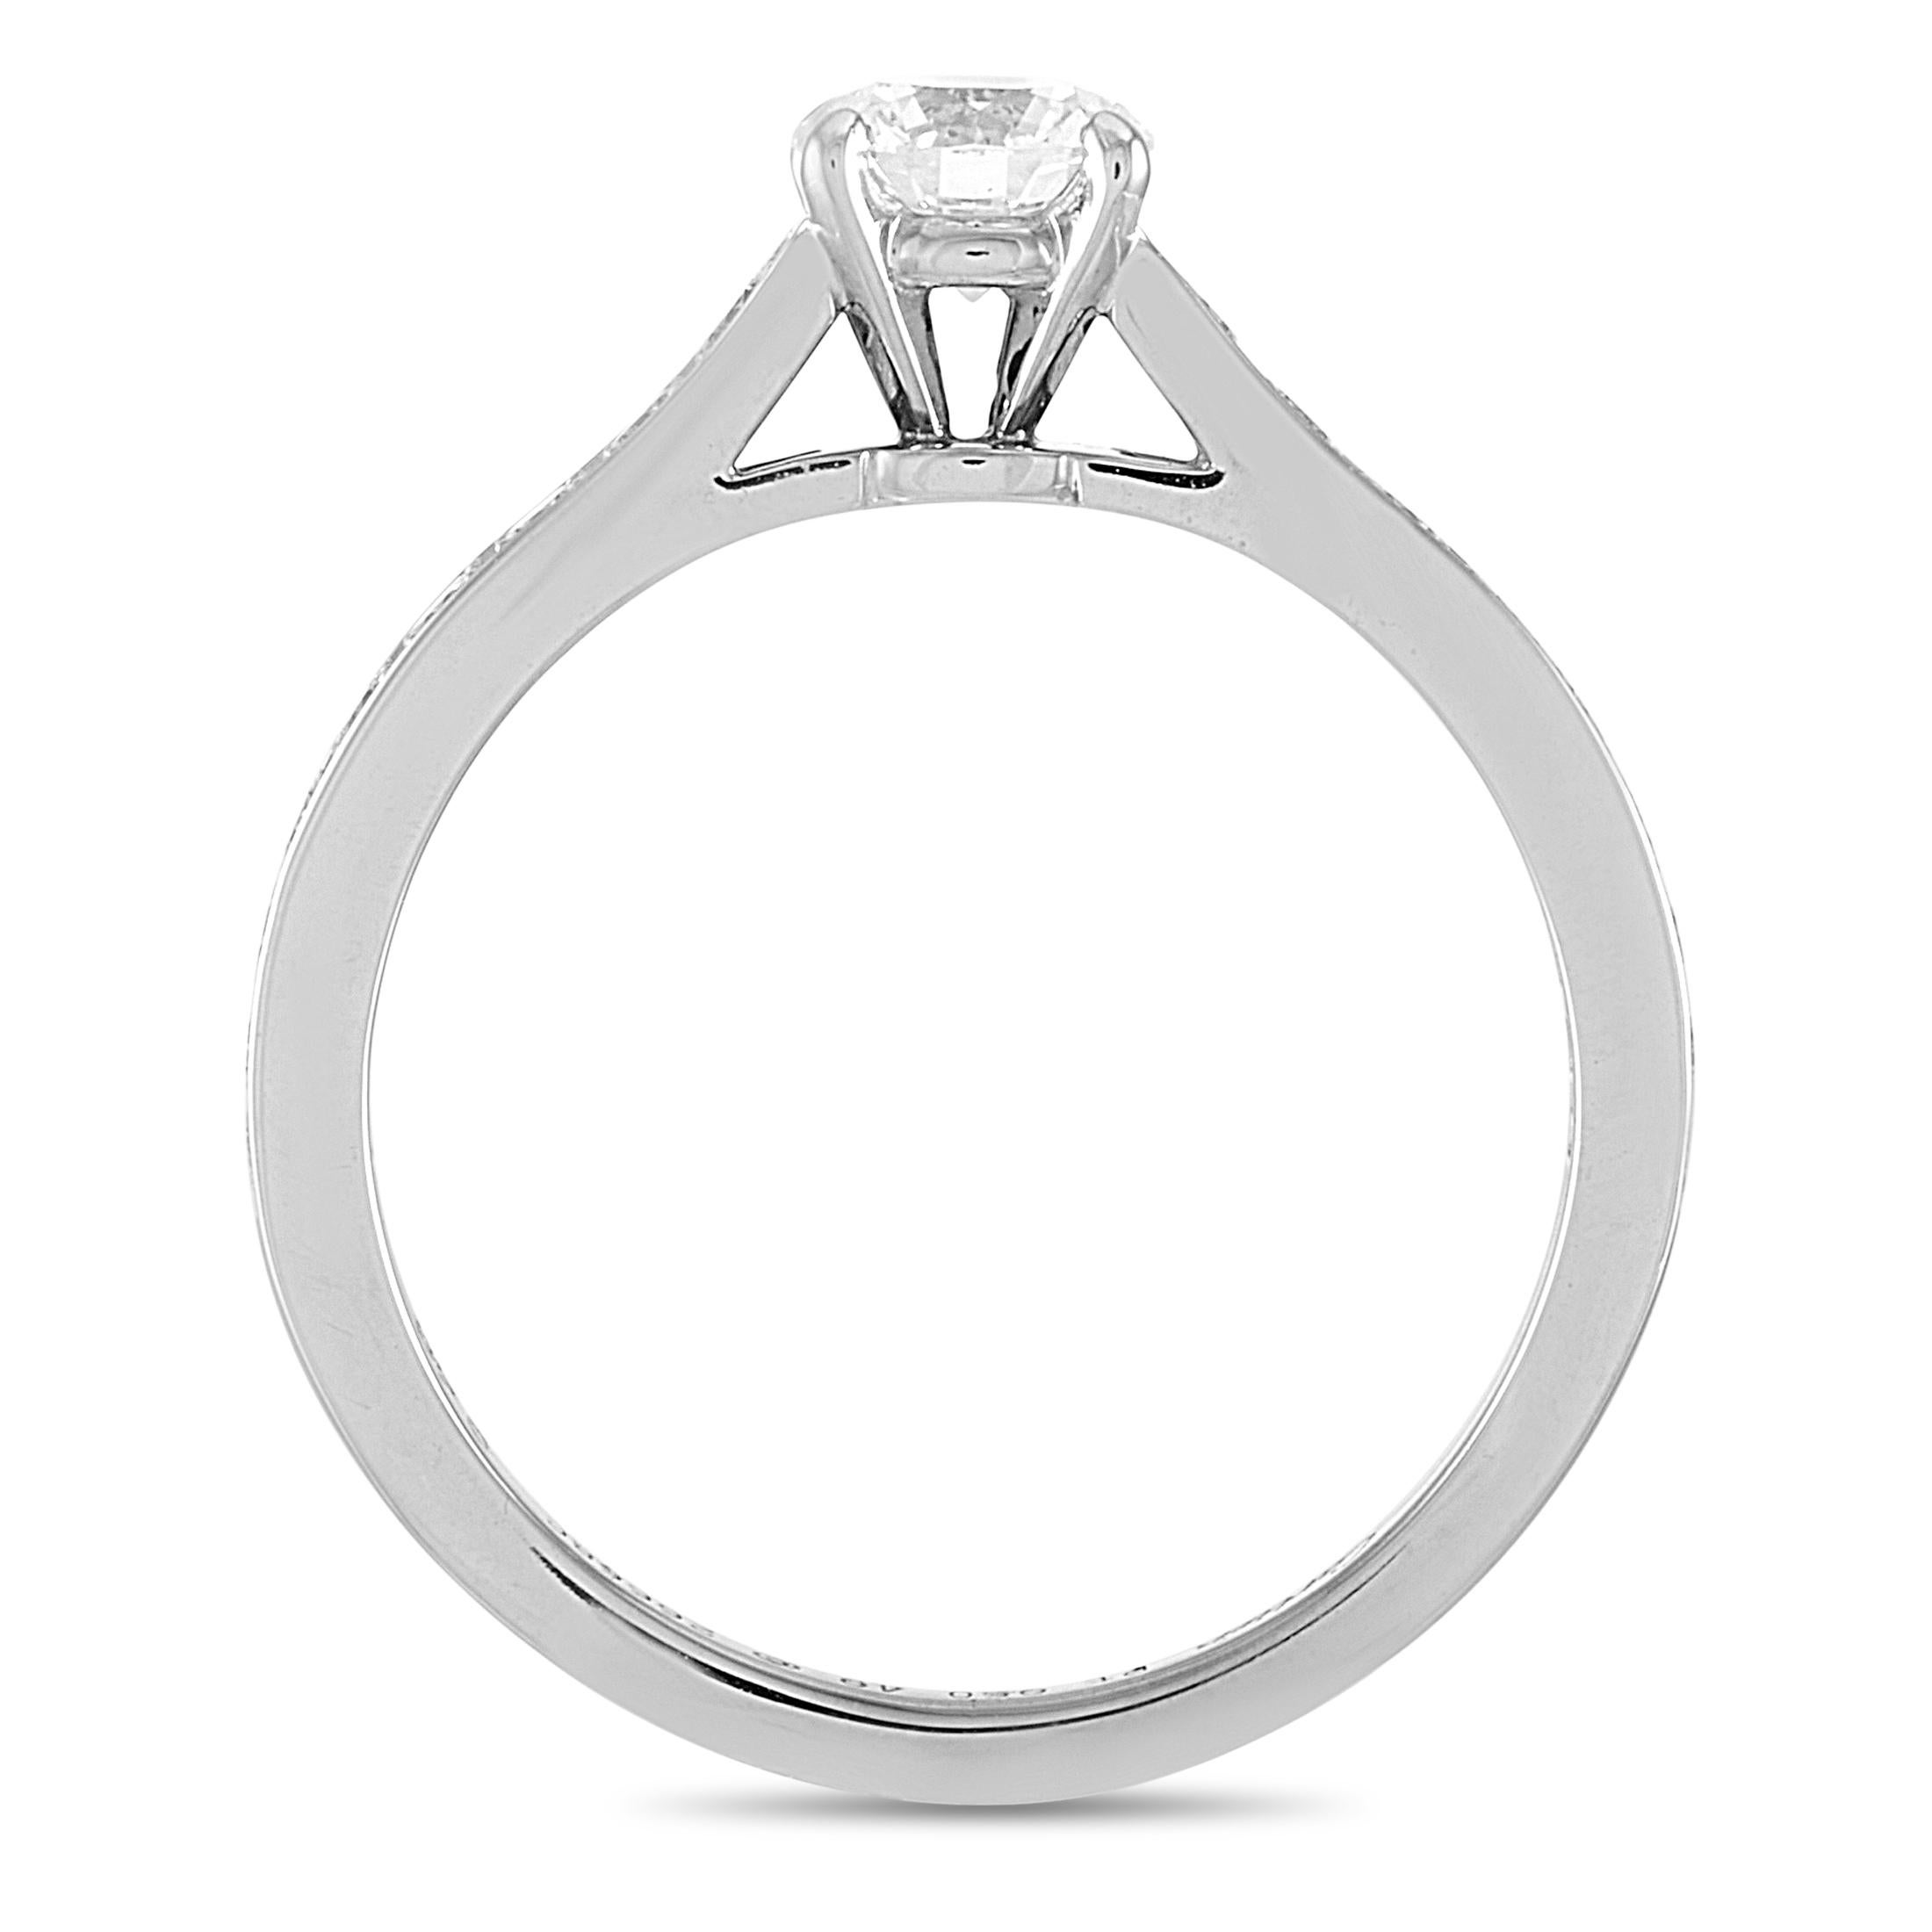 The Cartier “Solitaire” engagement ring is crafted from platinum and weighs 3.2 grams. It boasts band thickness of 2 mm and top height of 6 mm, while top dimensions measure 5 by 18 mm. The ring is set with a total of 0.60 carats of diamonds – the